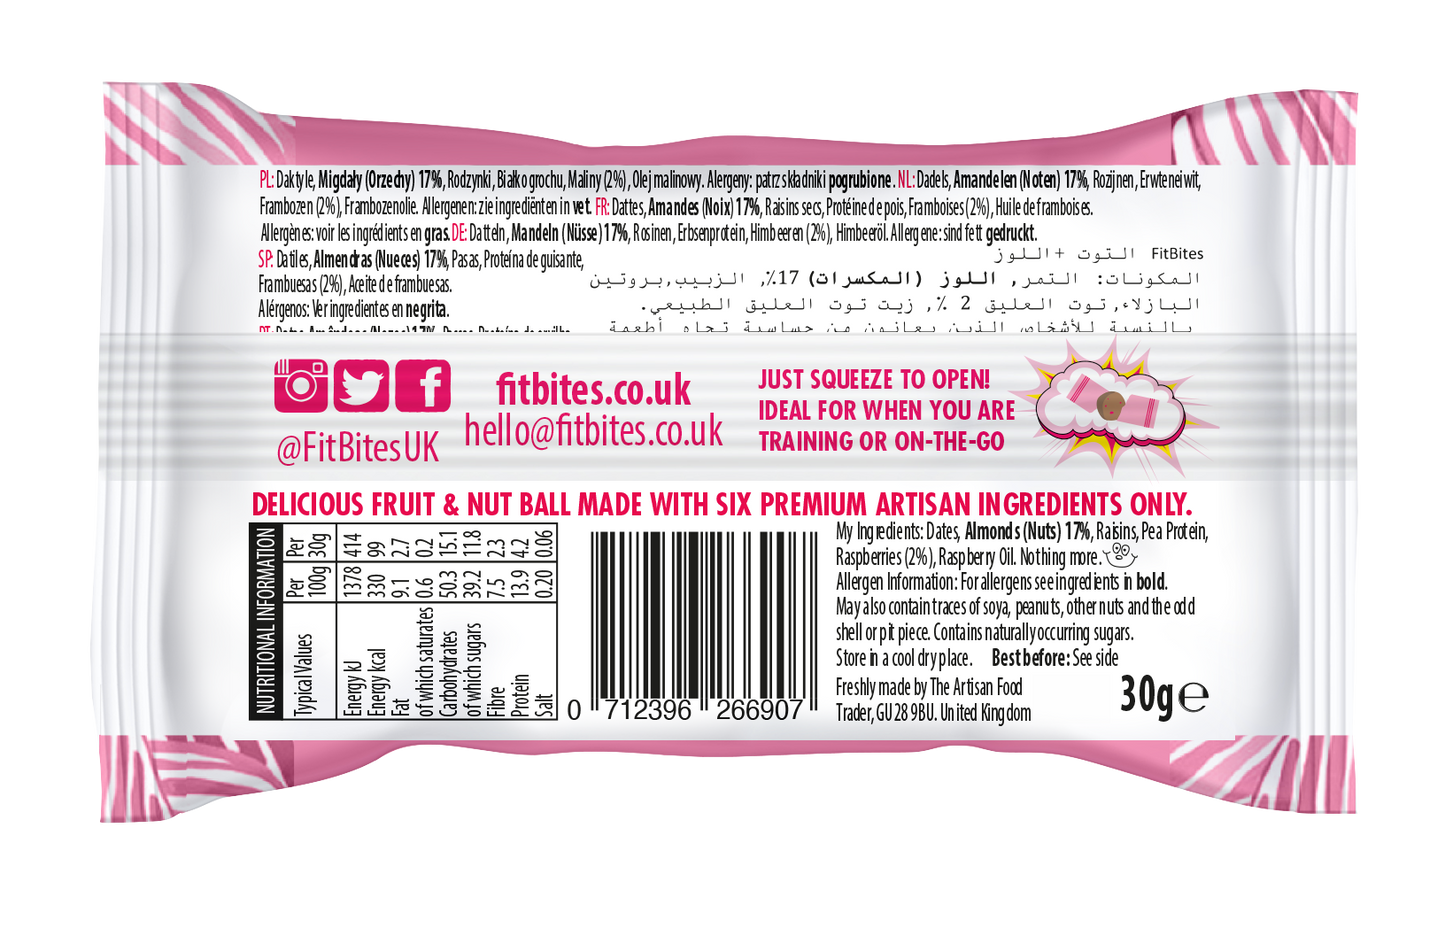 4. Berries + Almonds Energy & Protein 30g Snack Ball (Case of 18)